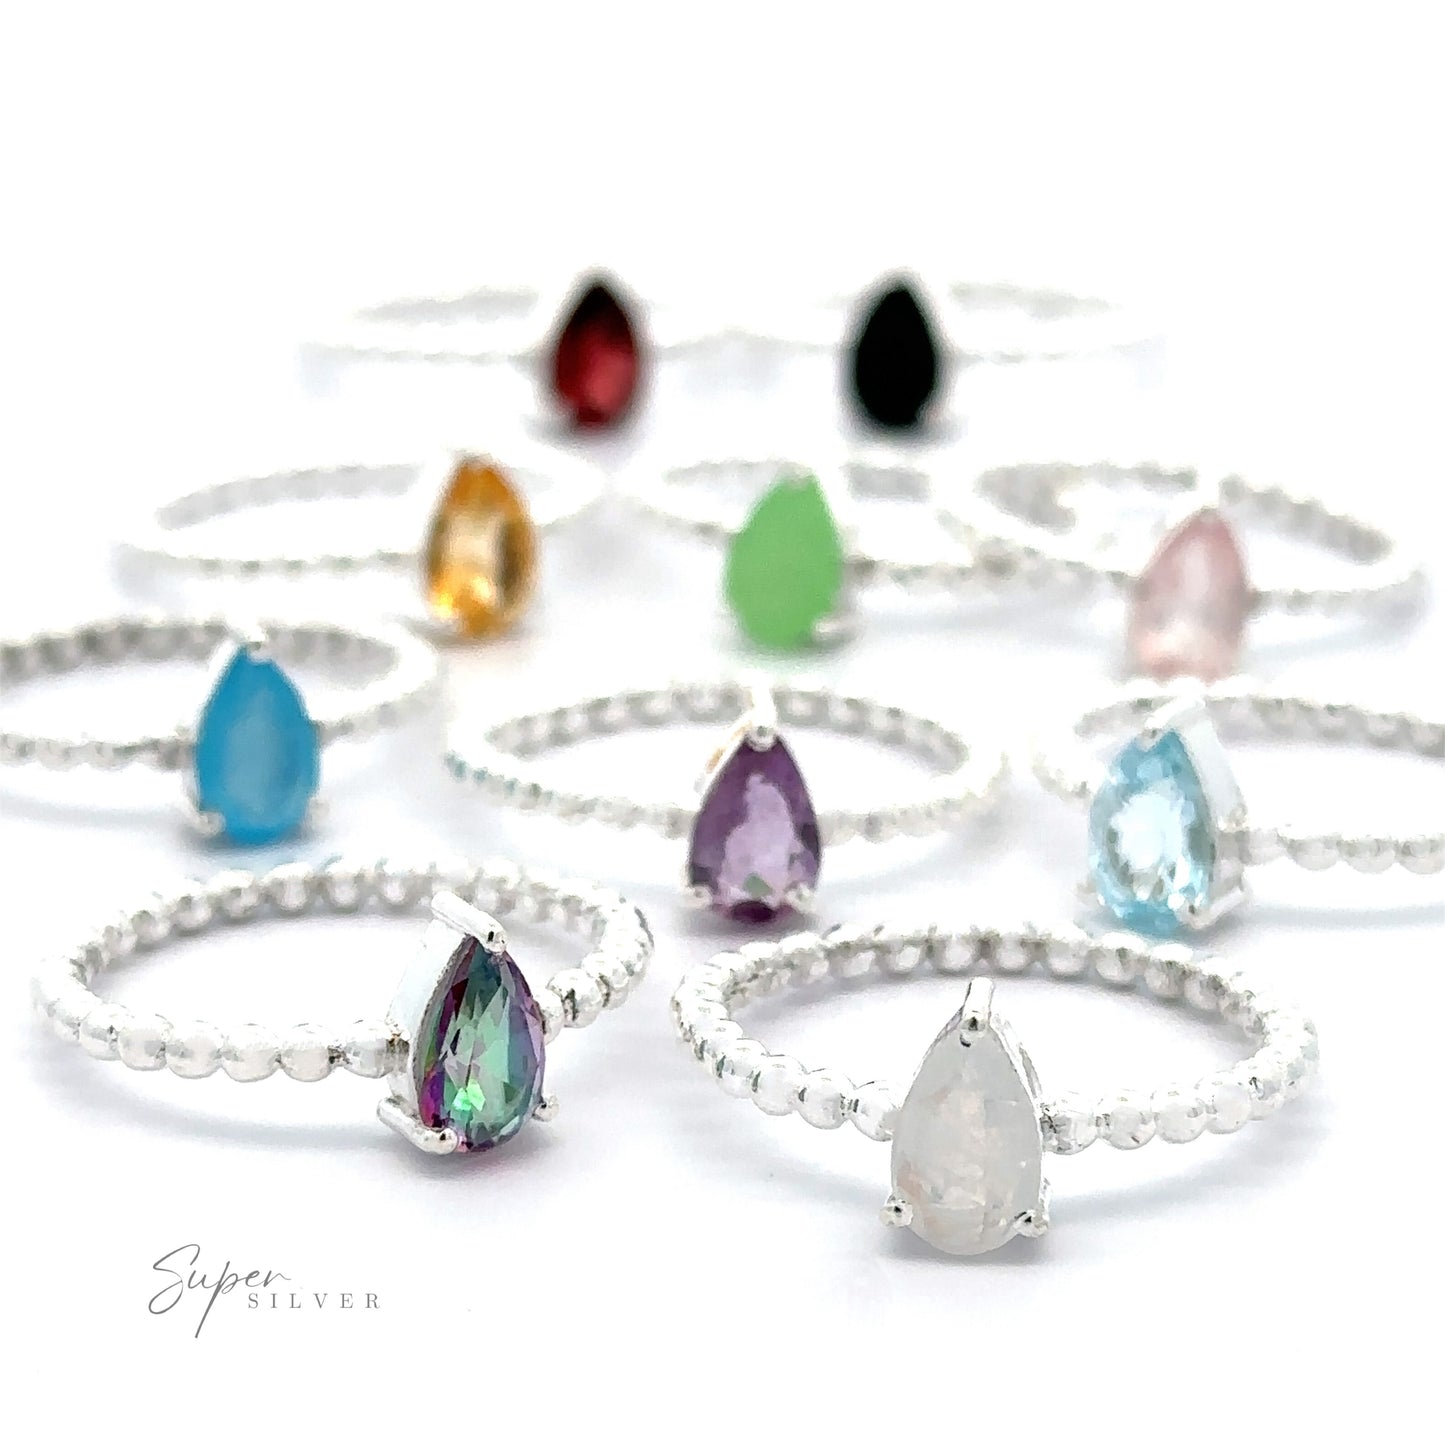 A collection of Sparkling Teardrop Gemstone on Beaded Band rings with various colored teardrop gemstones in a prong setting on a white background.